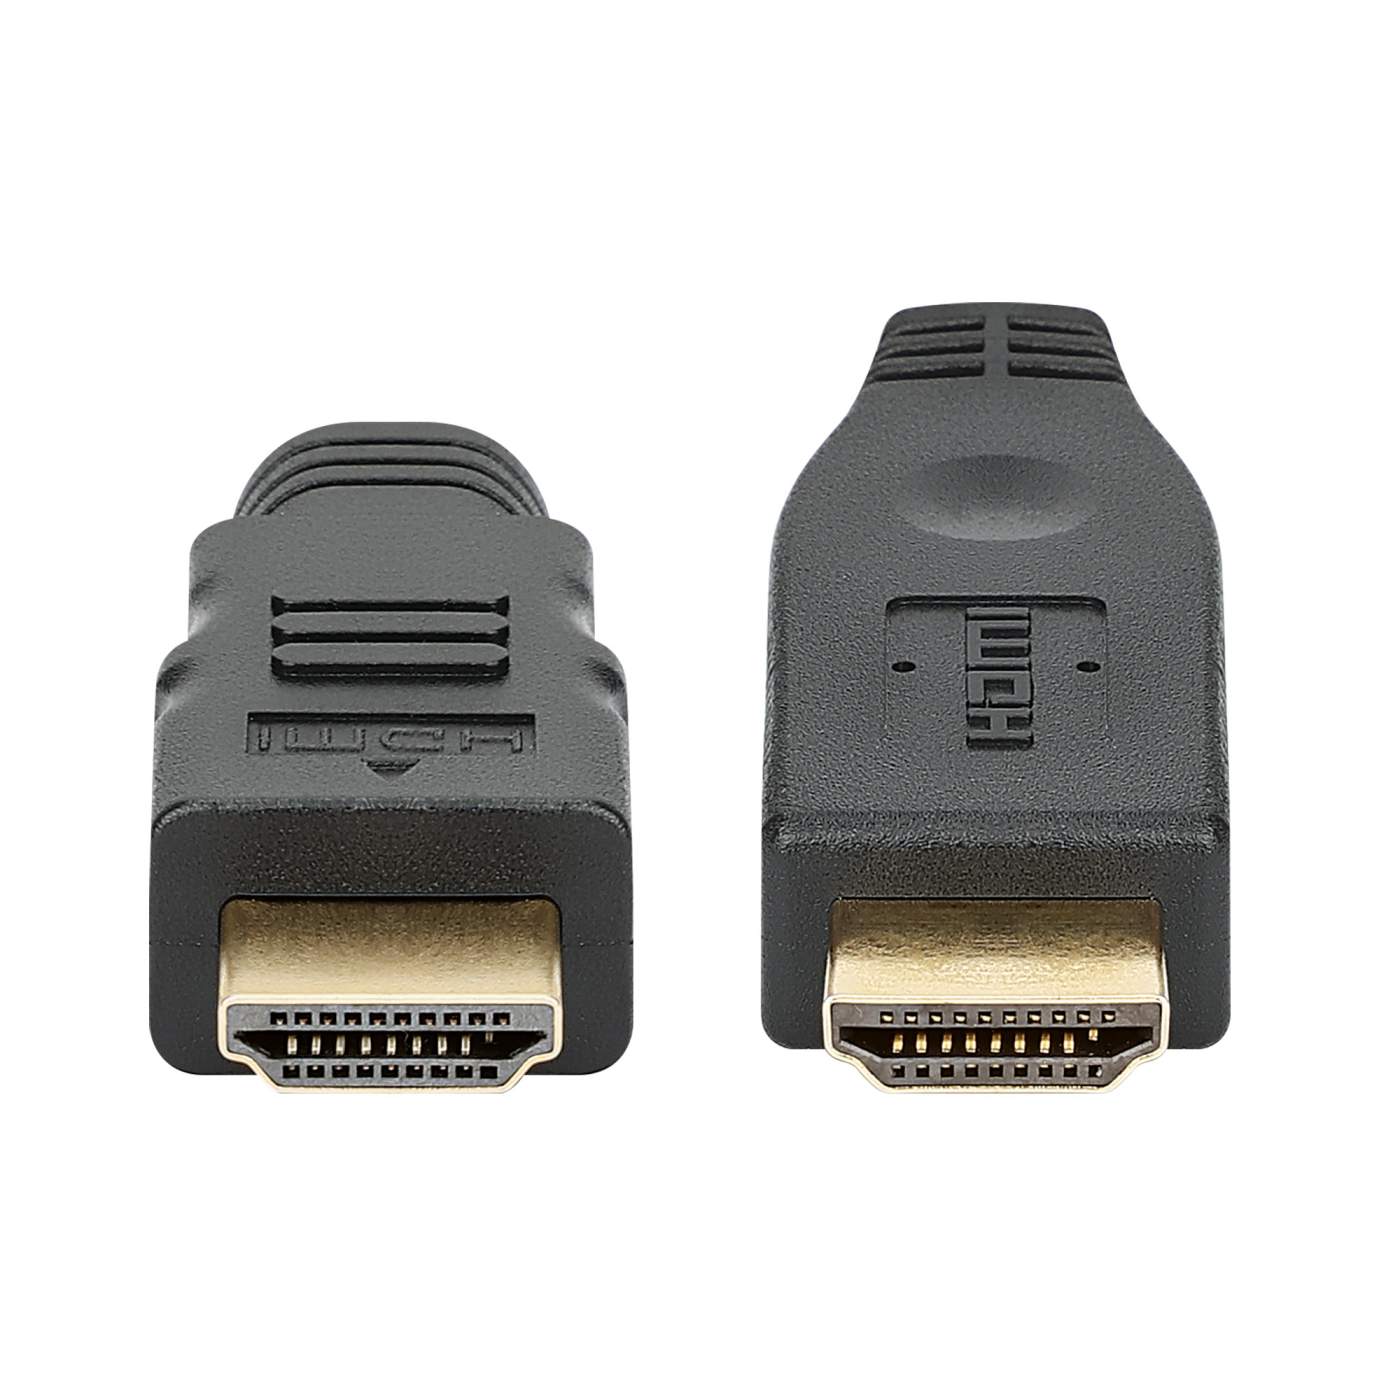 In-wall CL3 High Speed HDMI Cable w/ Ethernet (354486)